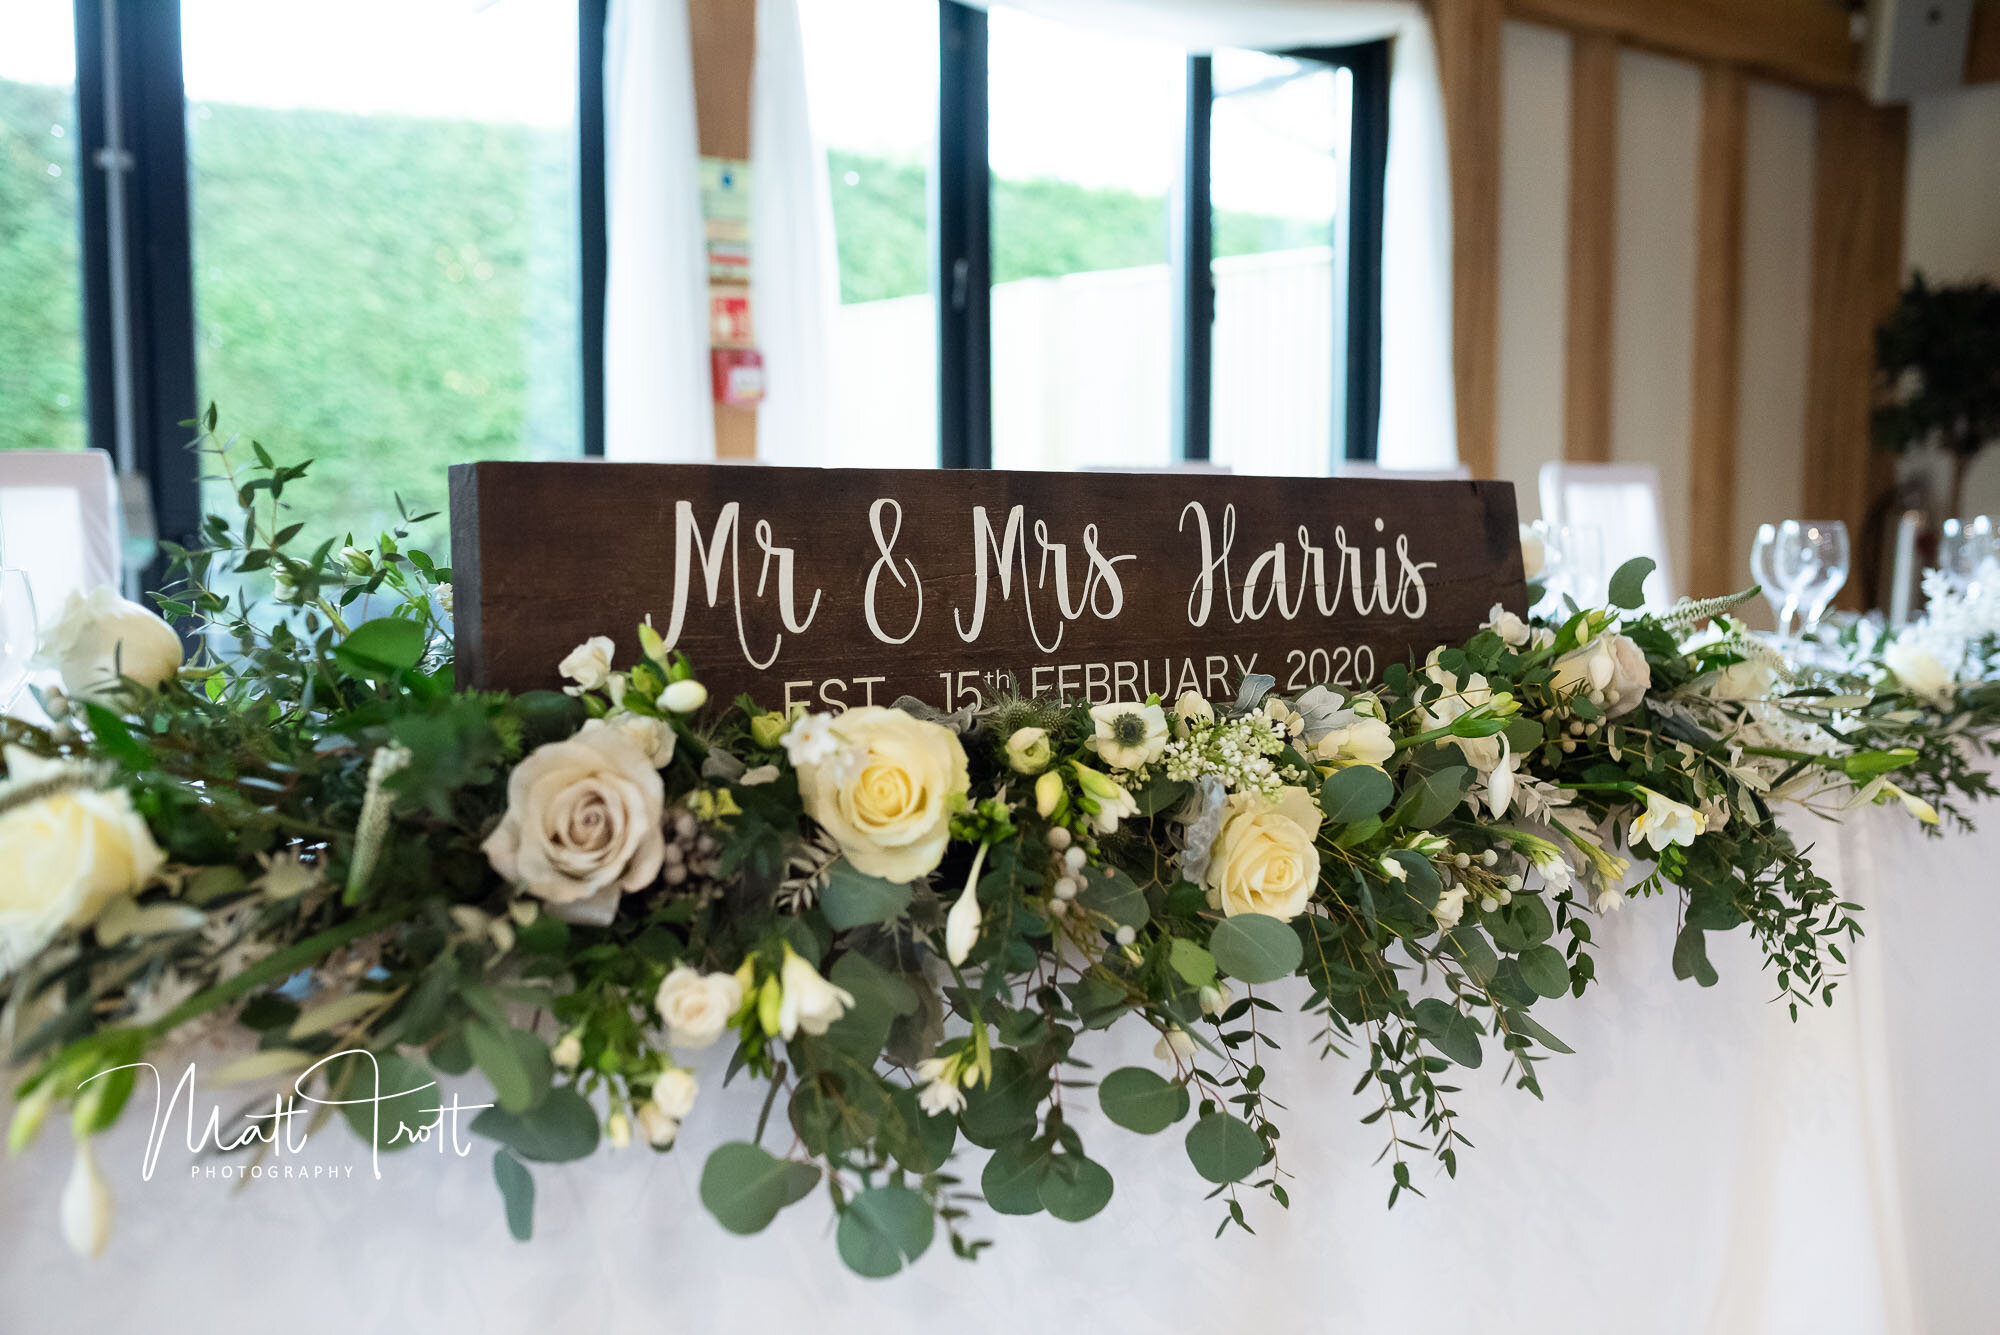 Table top flowers at the old kent barn wedding venue